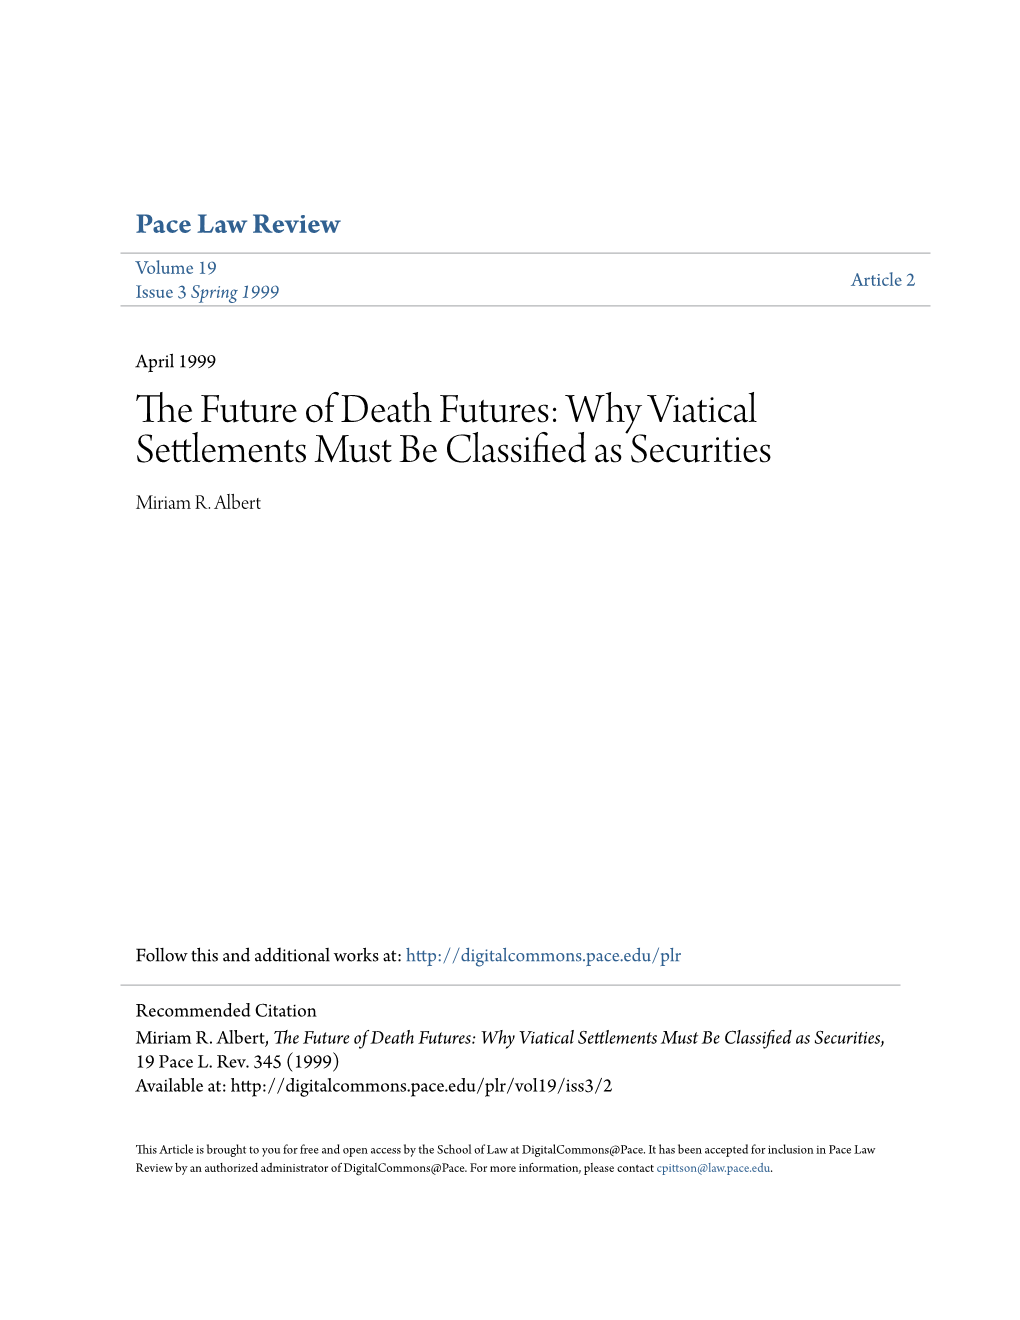 The Future of Death Futures: Why Viatical Settlements Must Be Classified As Securities, 19 Pace L